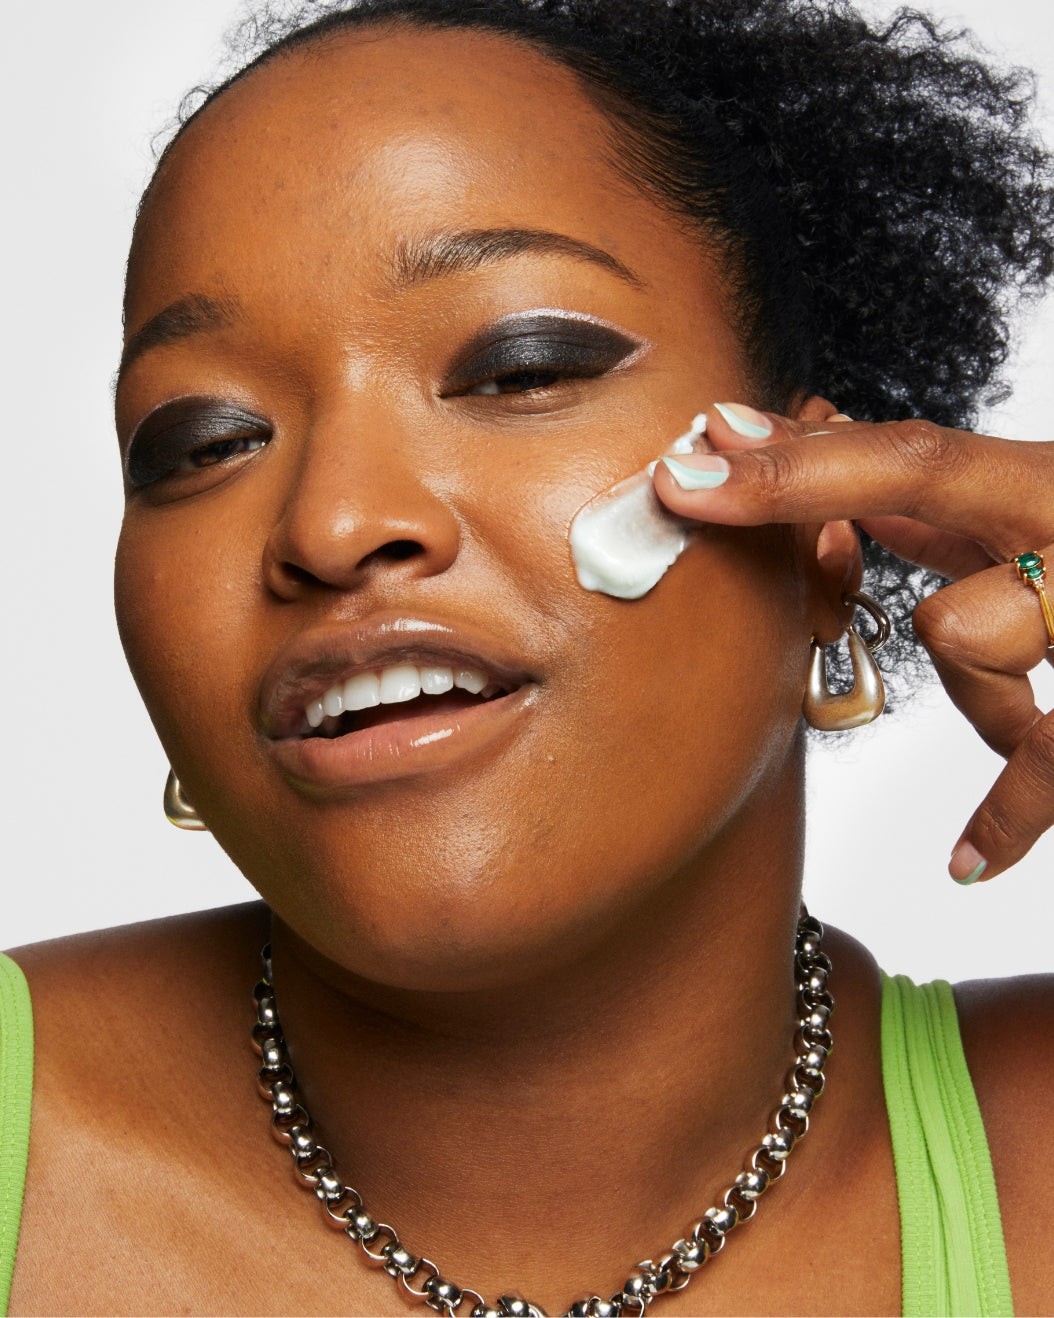 Model with makeup on applies a swipe of Milk Makeup Hydro Ungrip Cleansing Balm to their face against a white background.